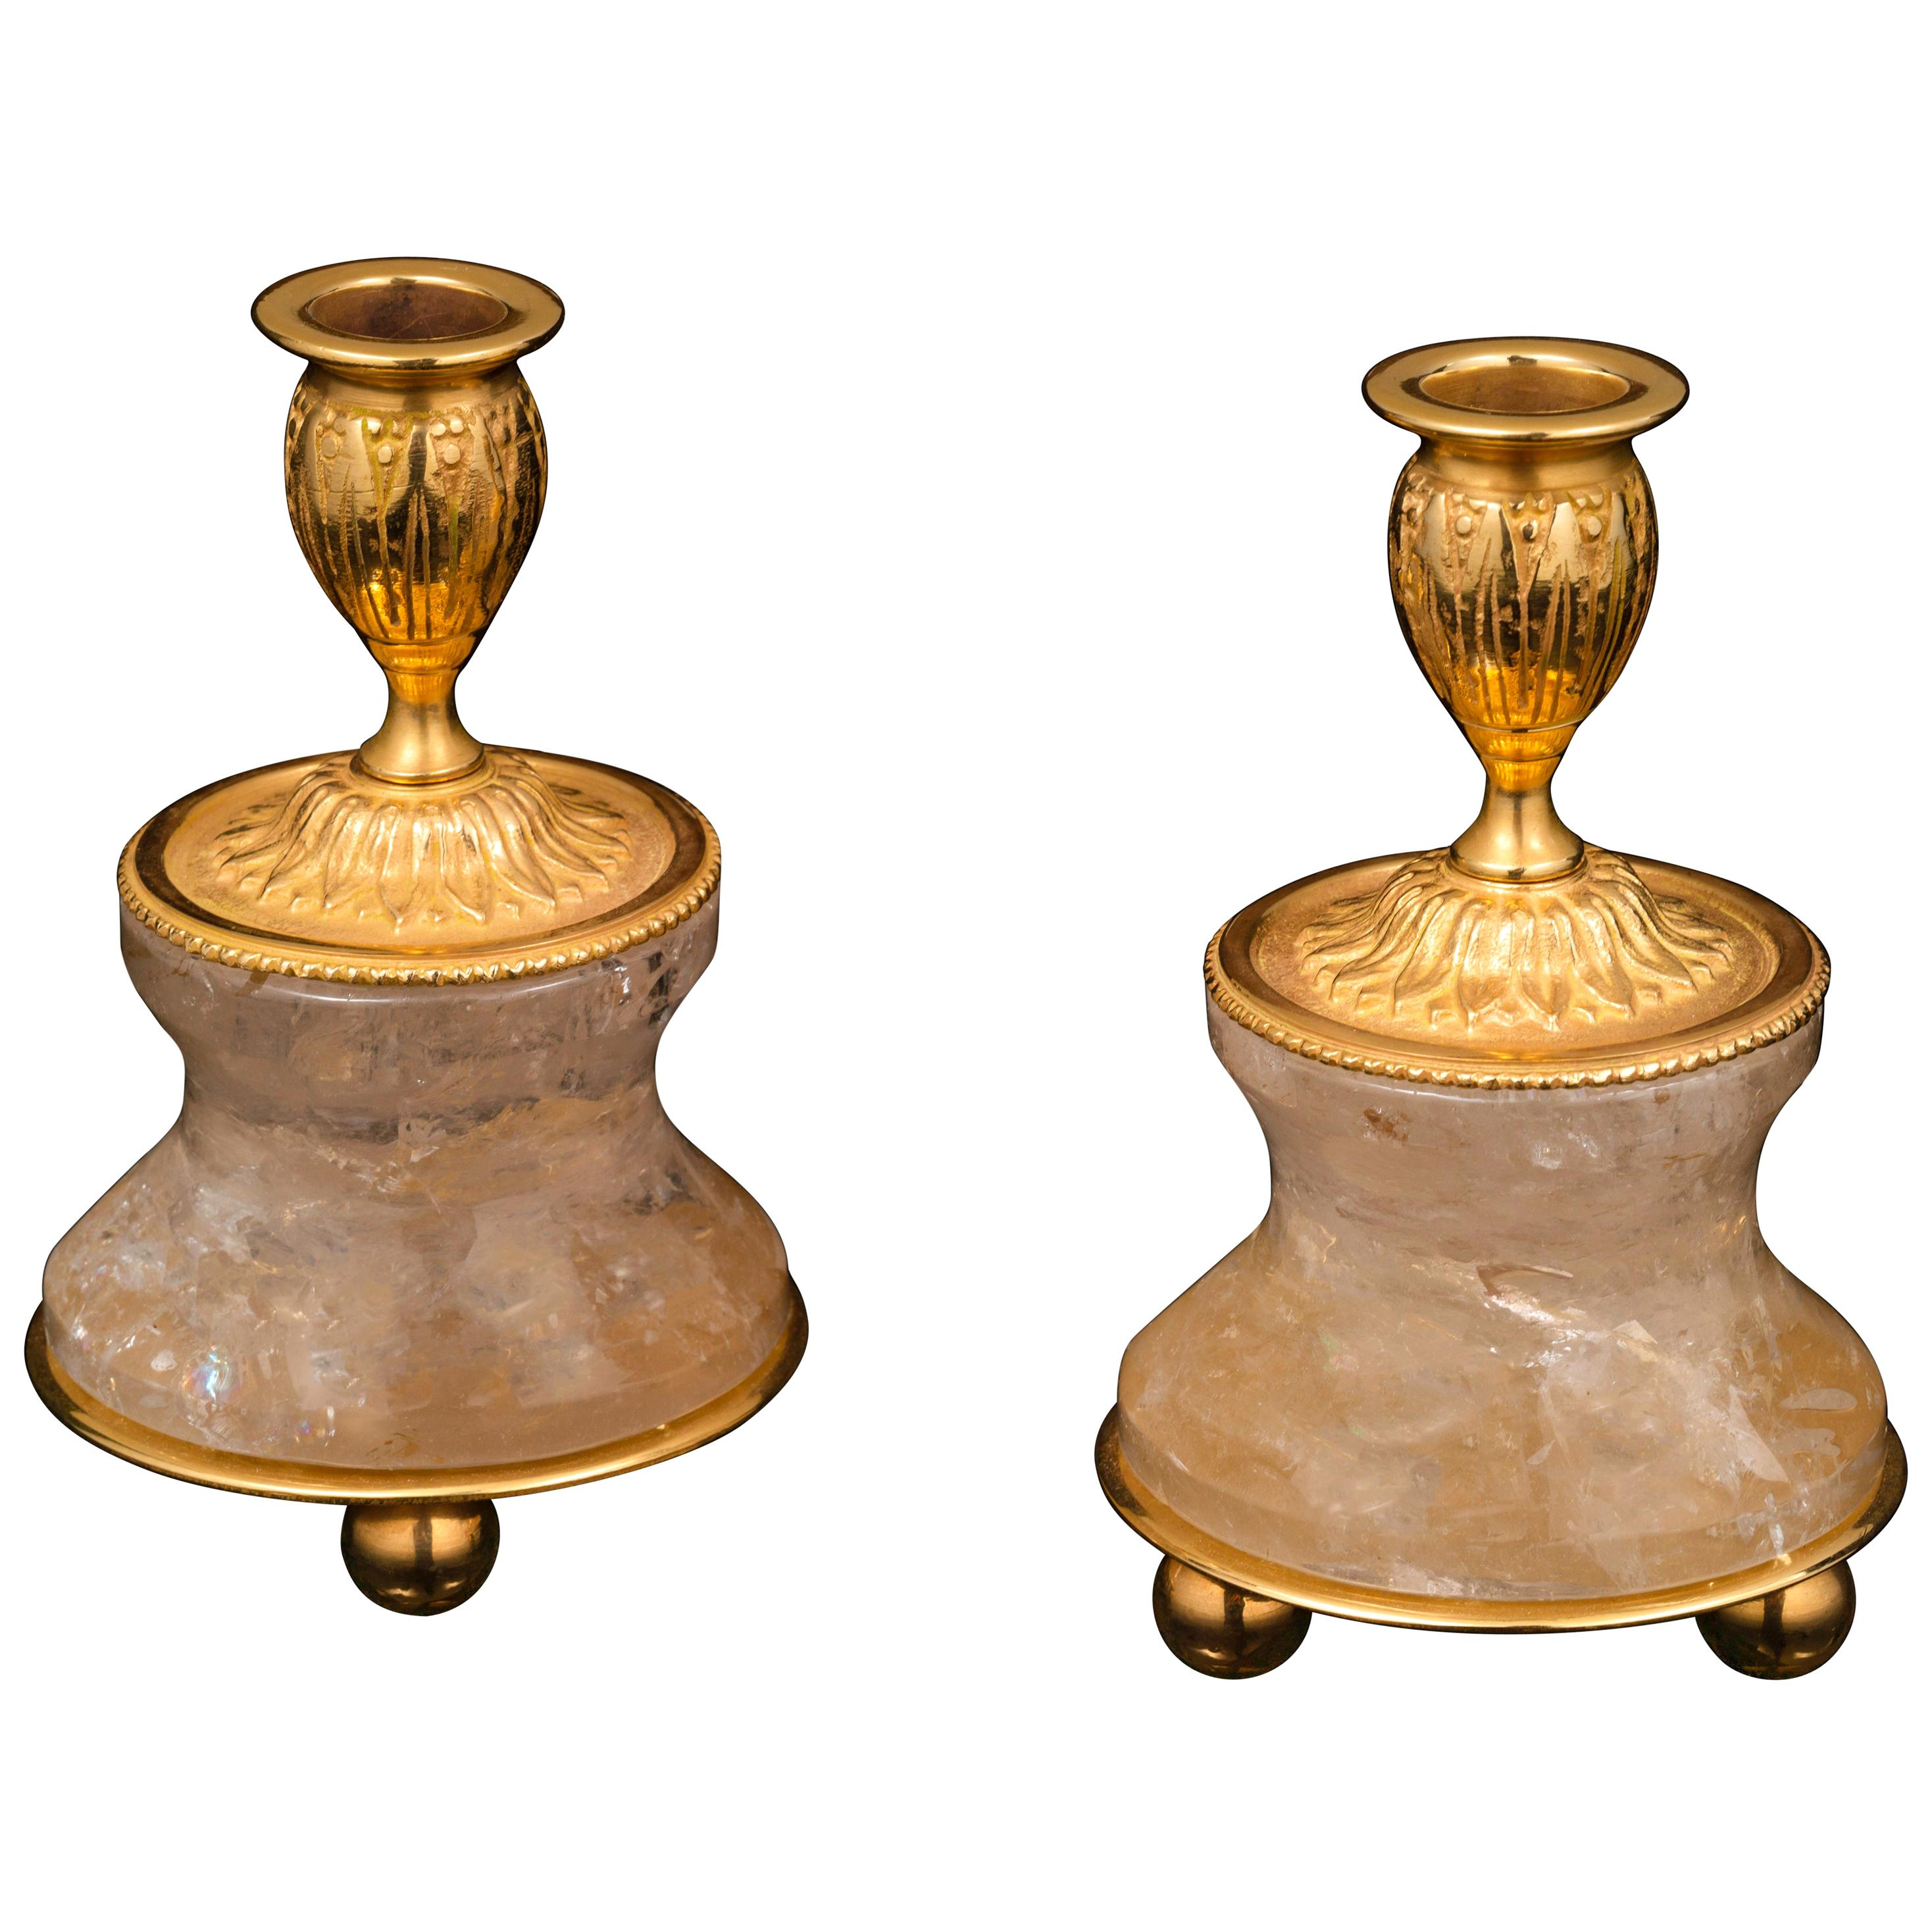 Pair of Rock Crystal and Gilt-Bronze Lamps/Candlesticks Louis XVI Style